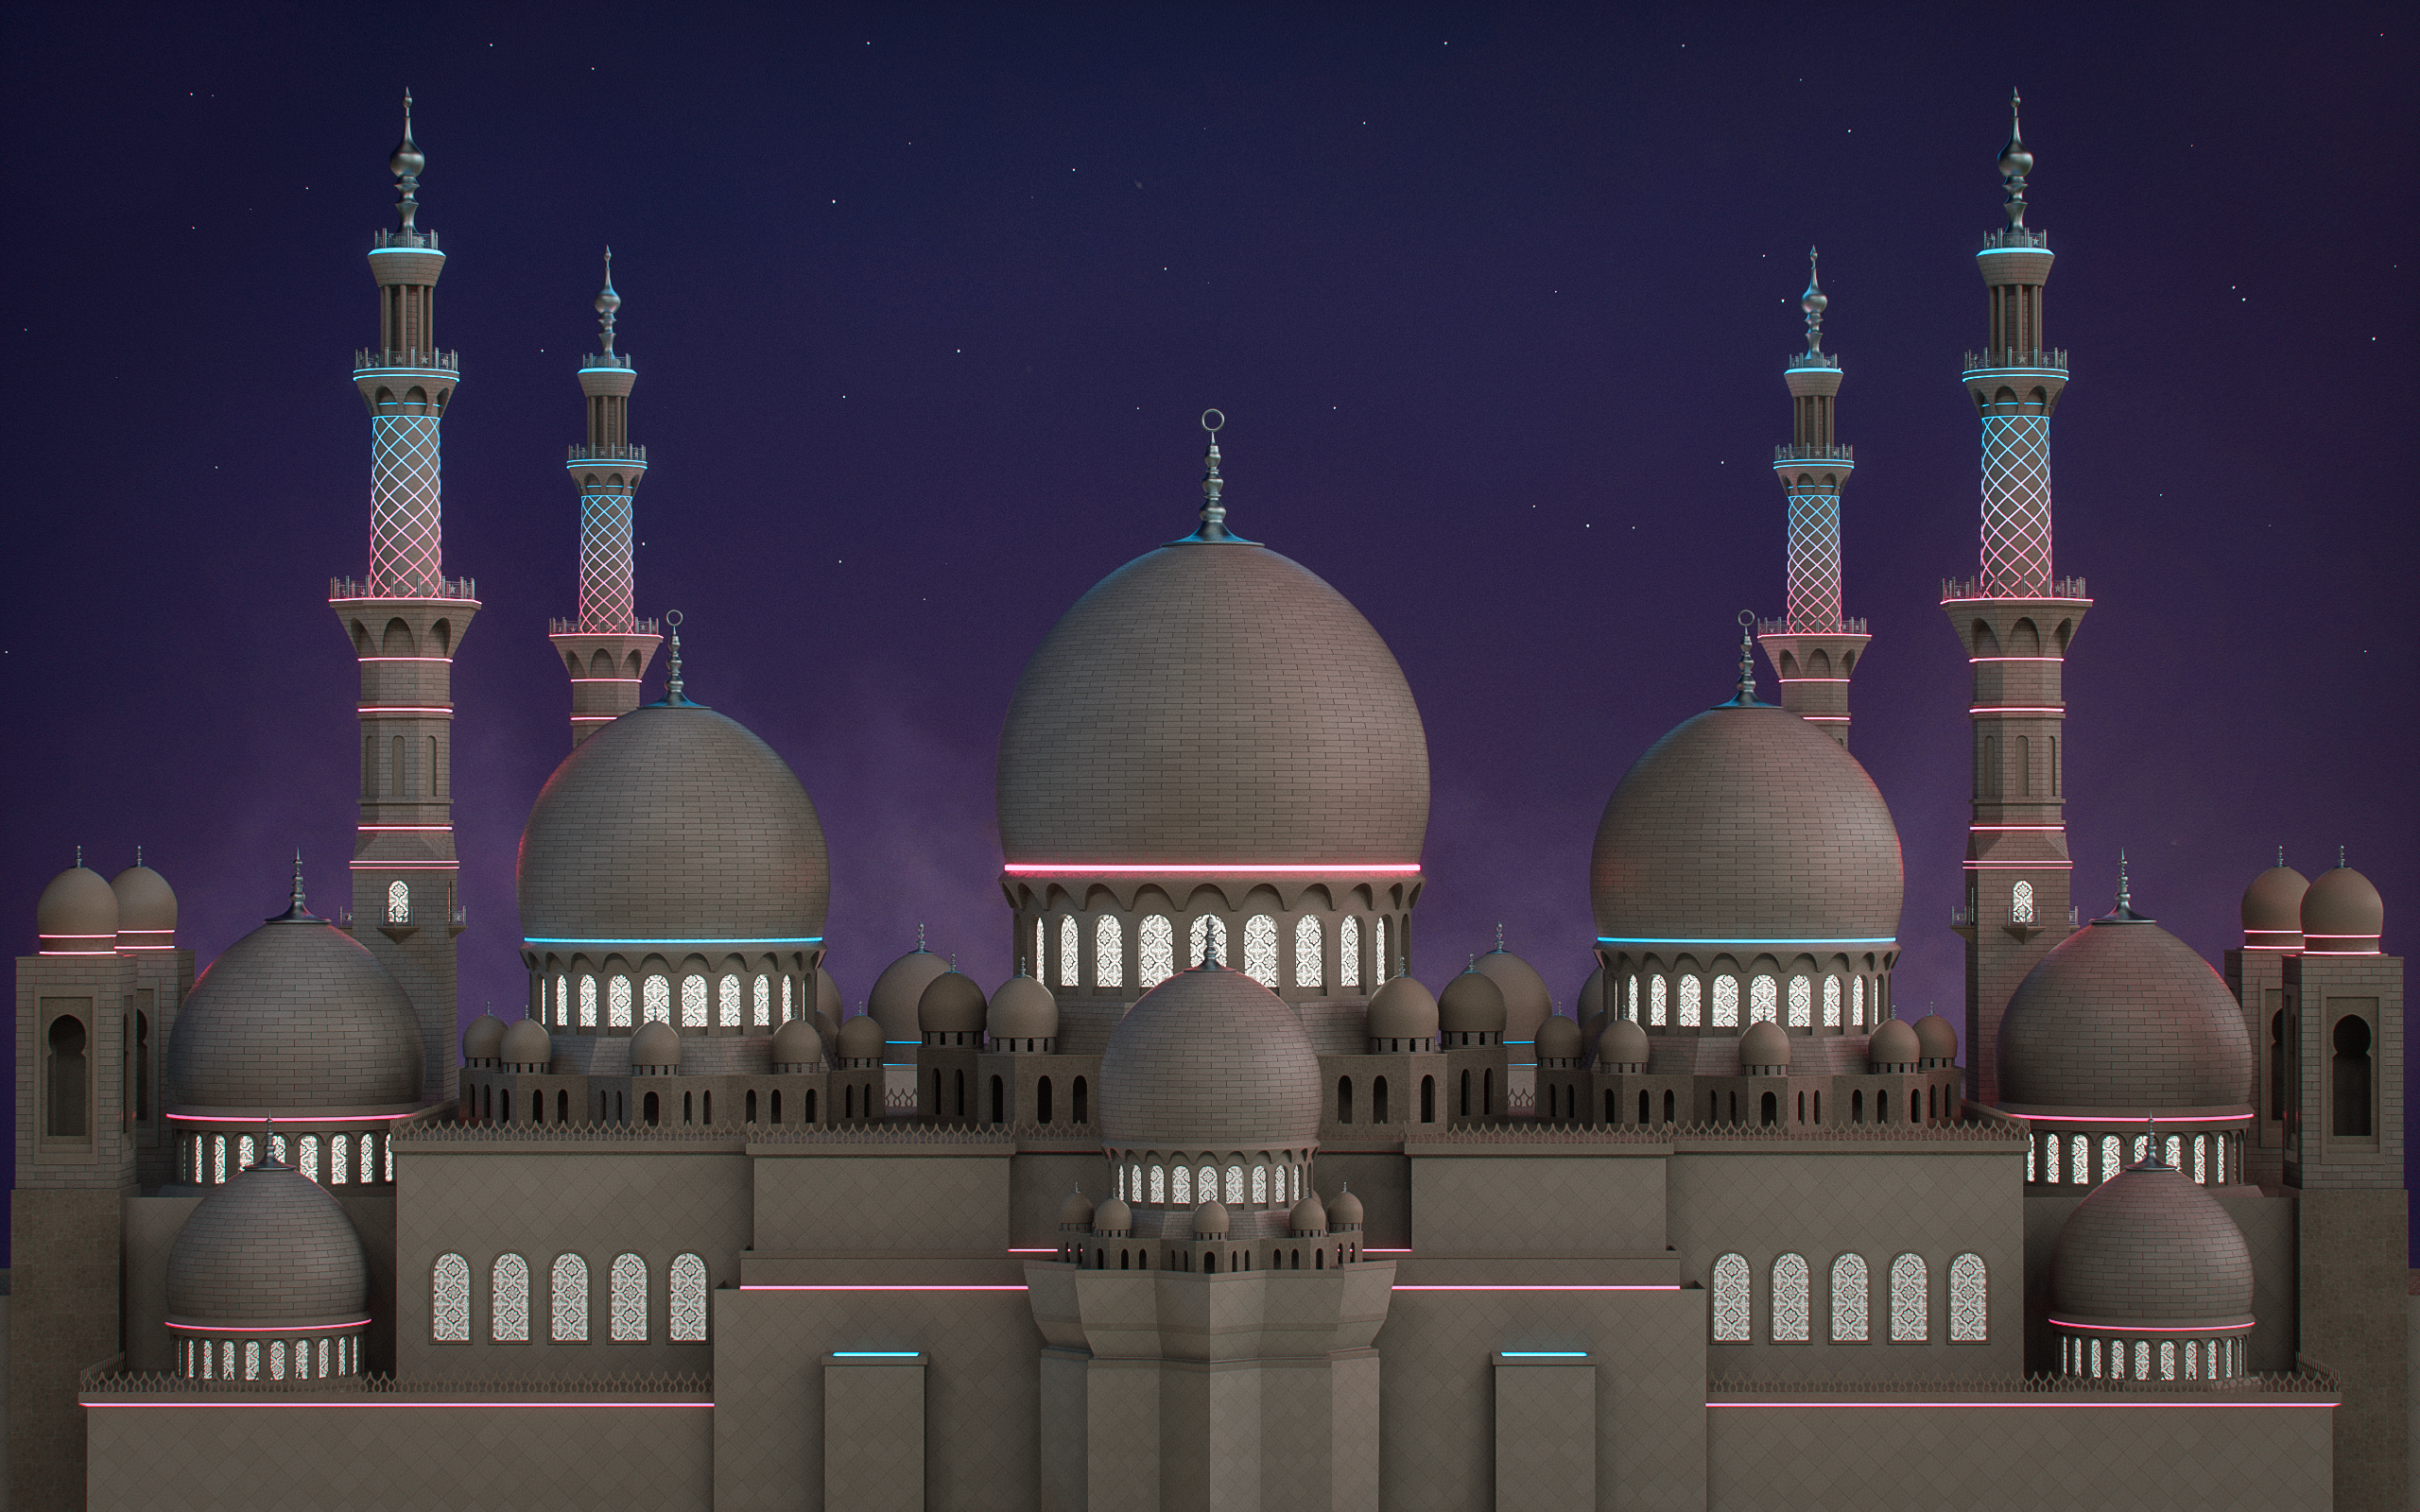 General 2560x1600 neon Arabic architecture tower palace night stars Cinema 4D abstract 3D Abstract smoke dust digital art CGI Alex Agreto building Sheikh Zayed BinSultan Nahyan Mosque Zayed Mosque